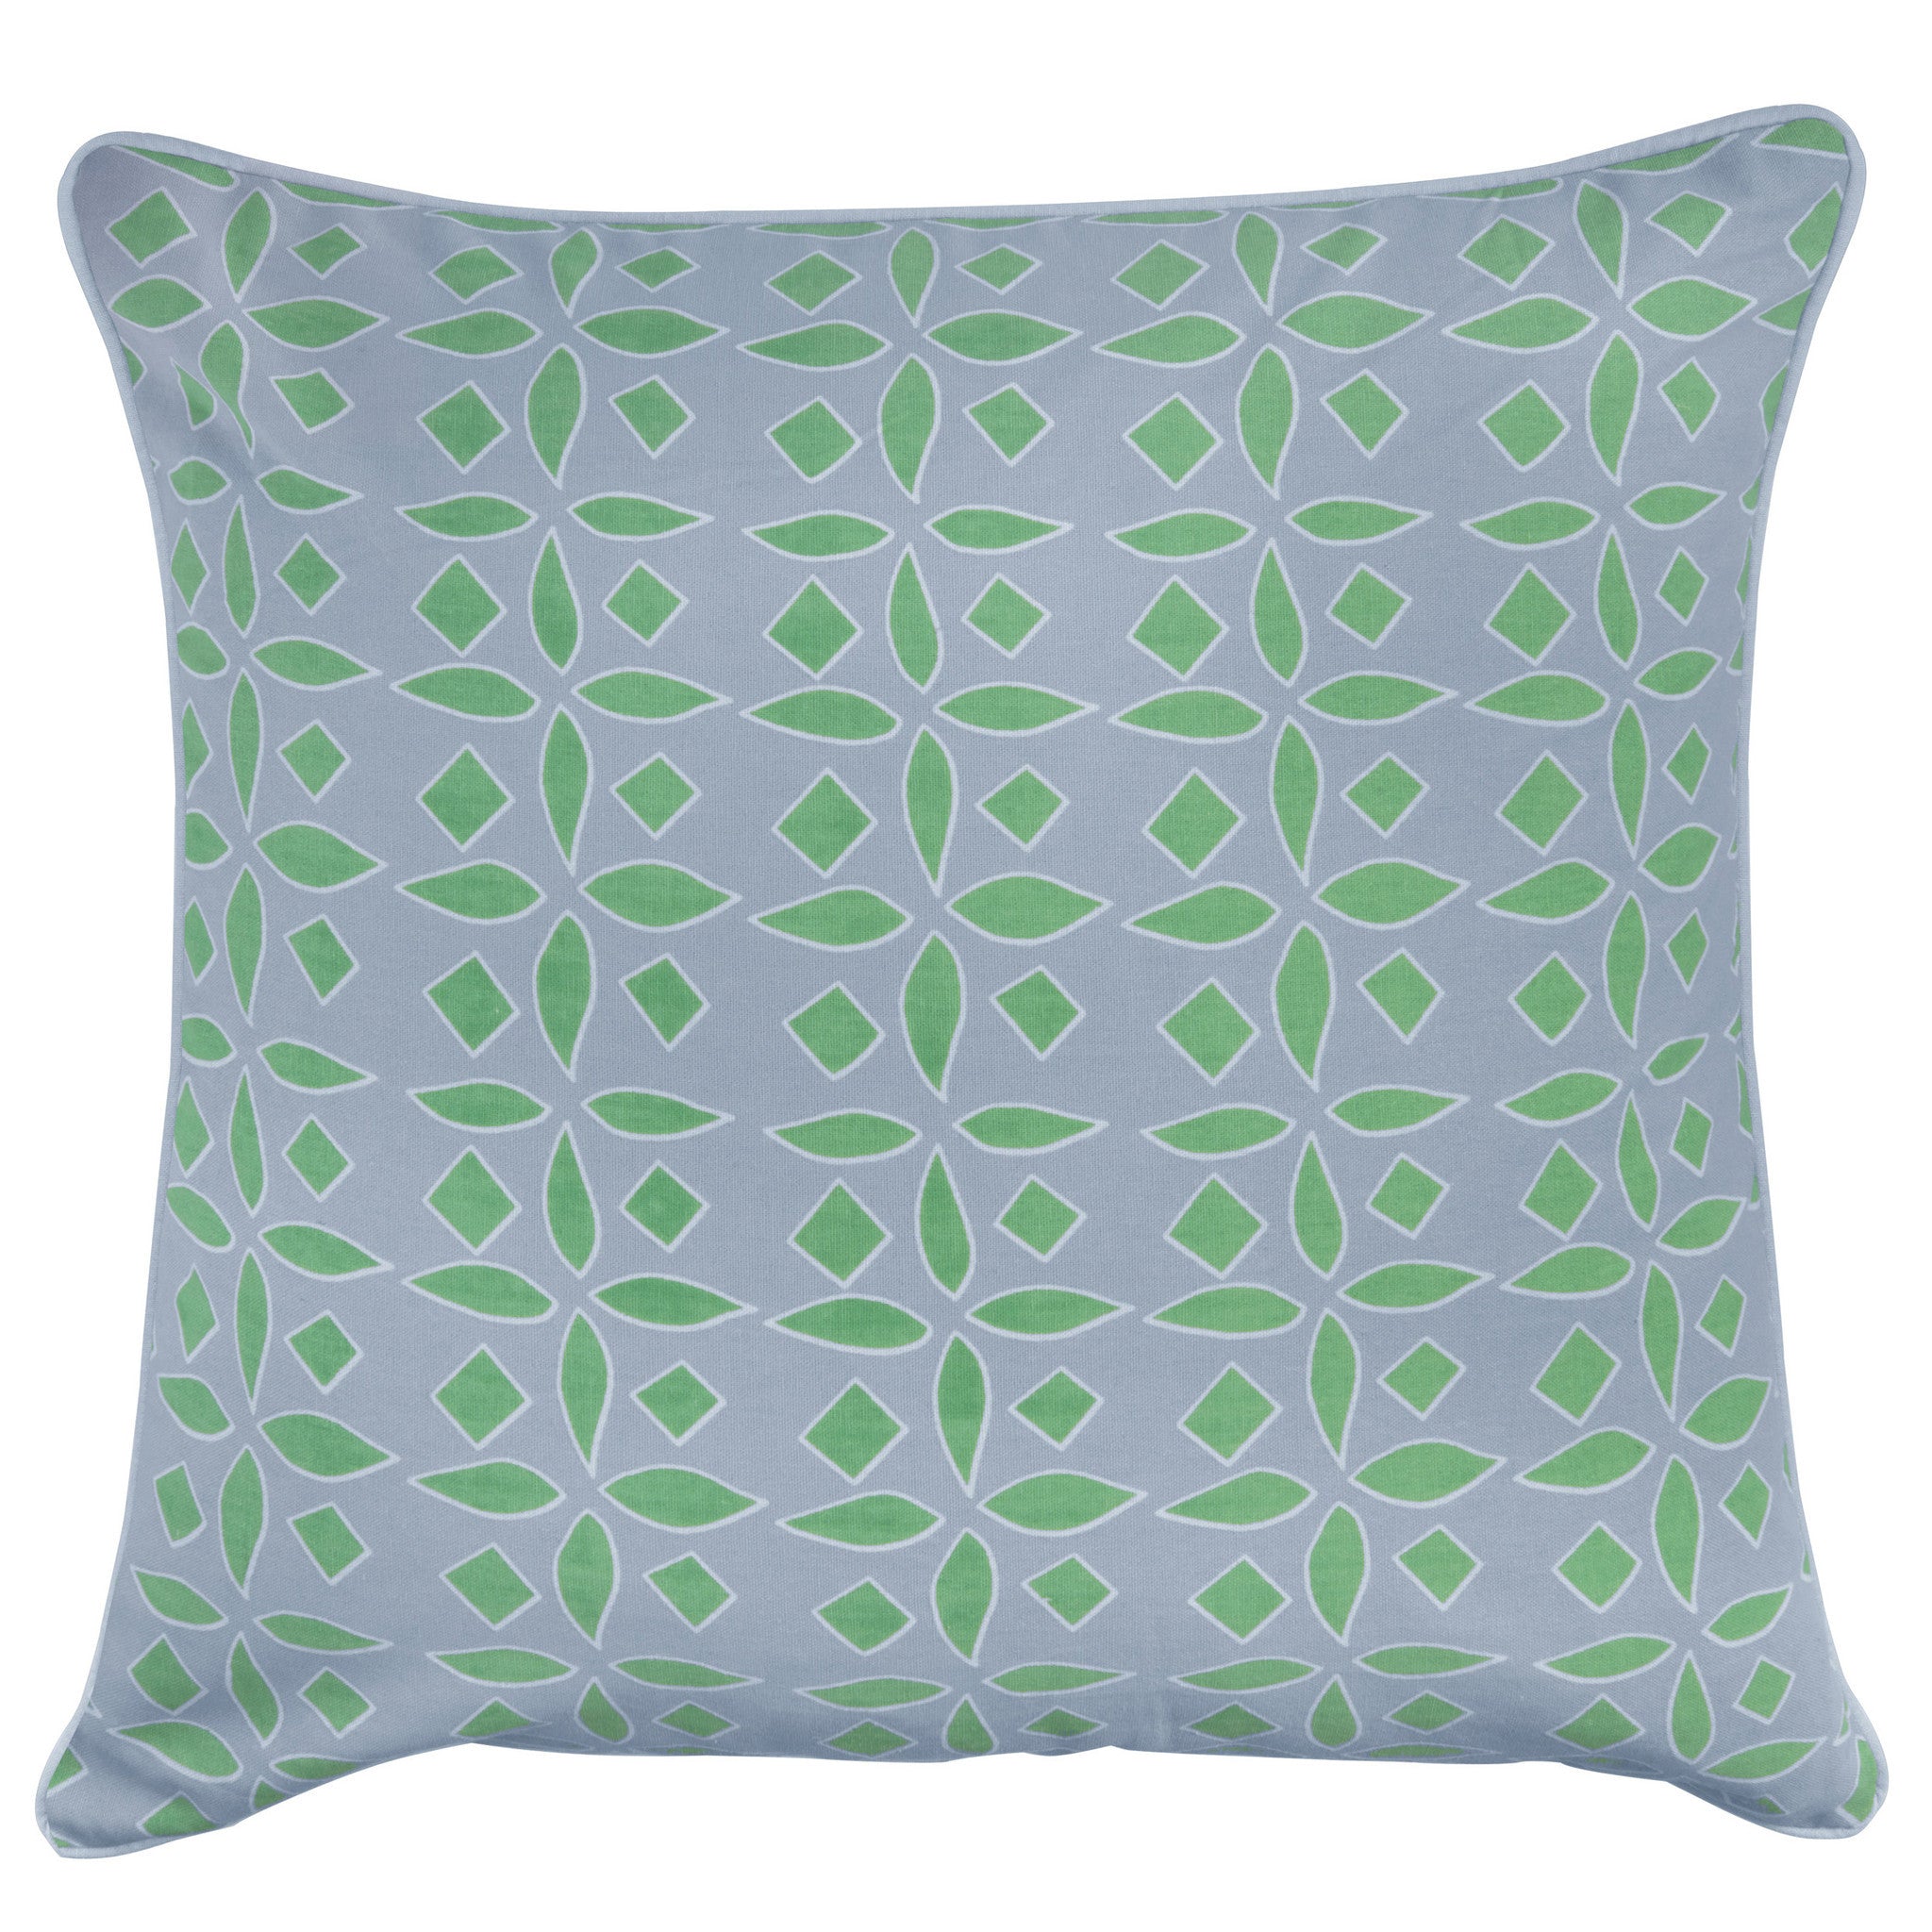 Light Blue and Green Decorative Pillow, 22 x 22-inch